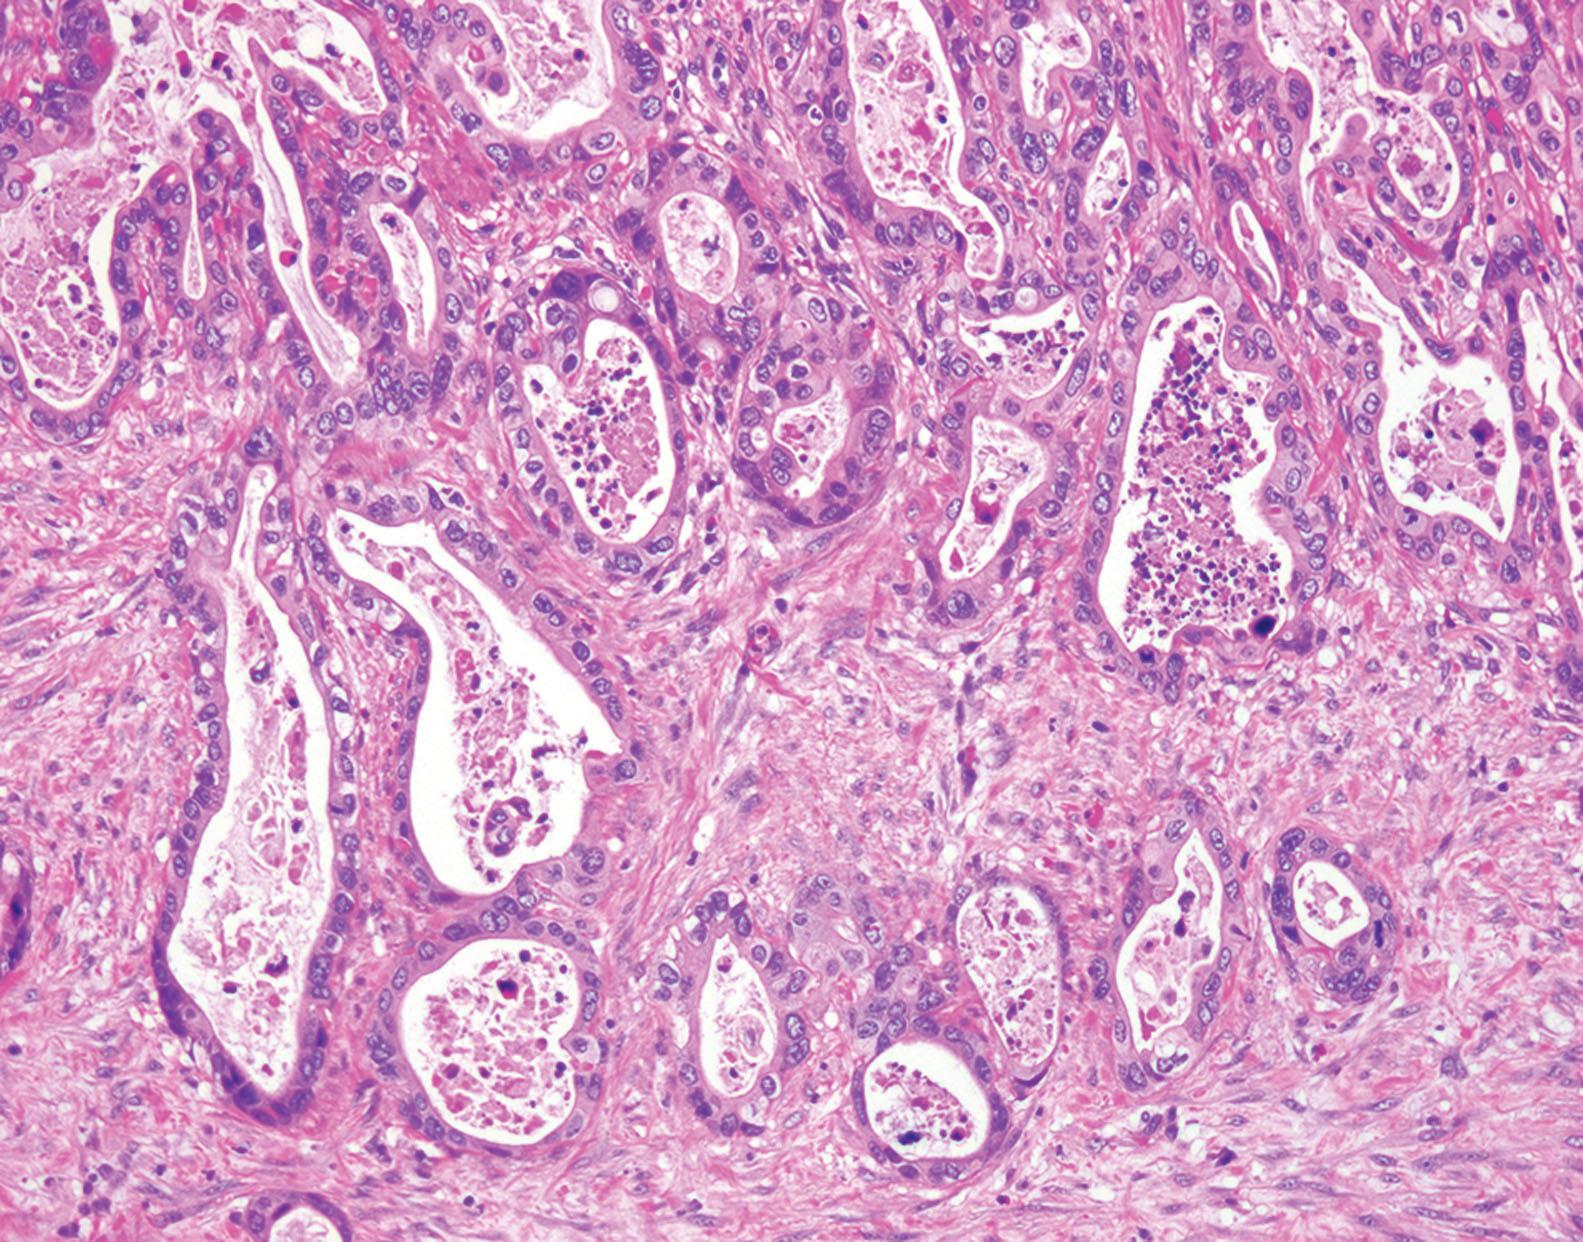 Figure 6.10, Adenocarcinoma of the terminal ileum in the setting of Crohn’s disease. Invasive adenocarcinoma in submucosa characterized by irregular glands, luminal necrosis, and stromal desmoplasia.